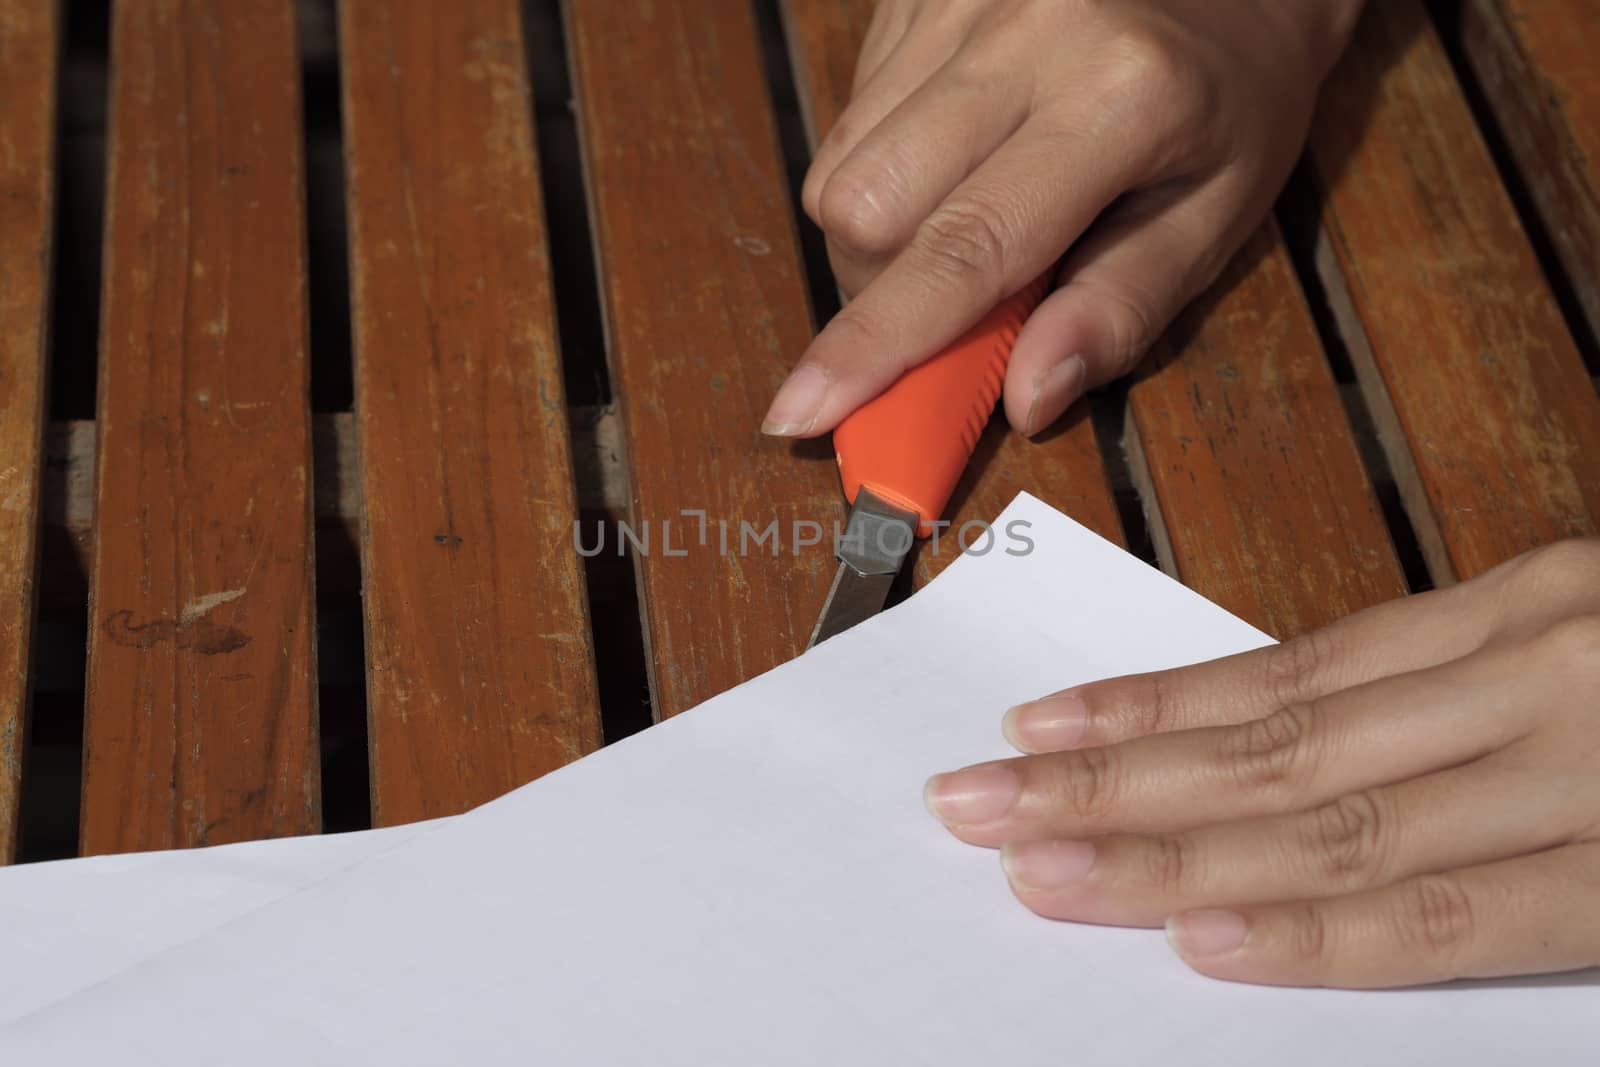 women hands cutting carton with a knife on a paper. Close up handwork.